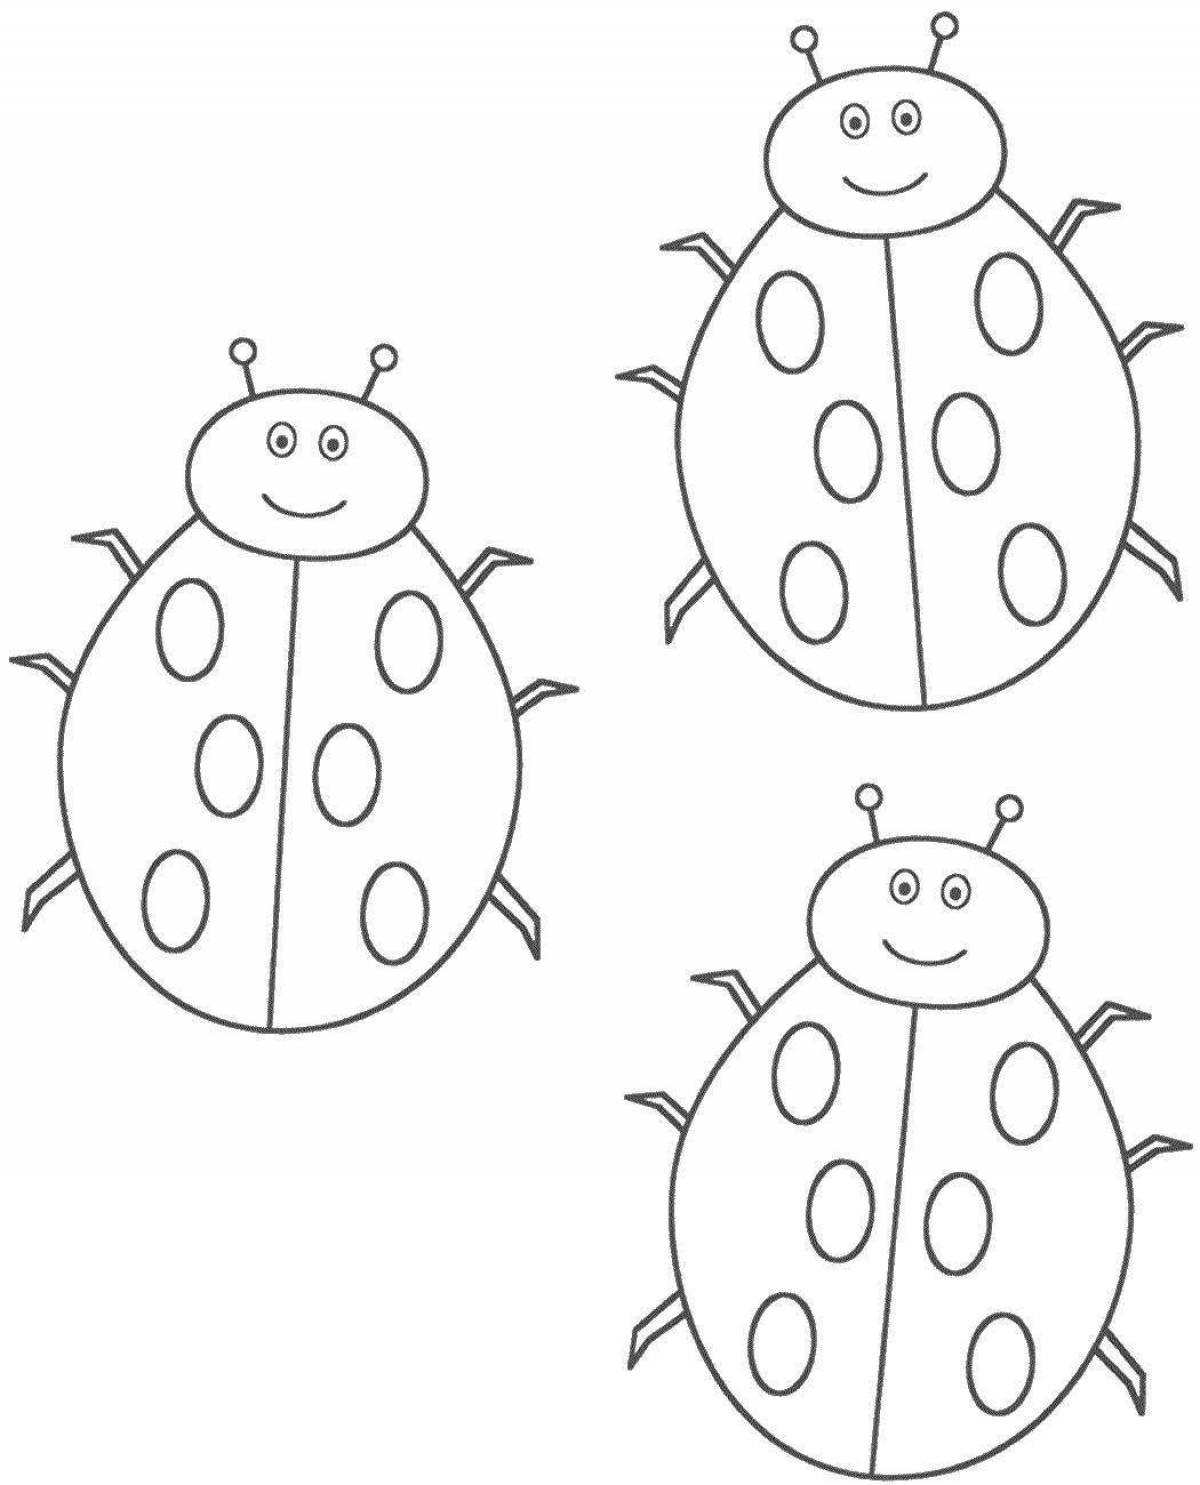 Fabulous ladybug coloring book for 6-7 year olds